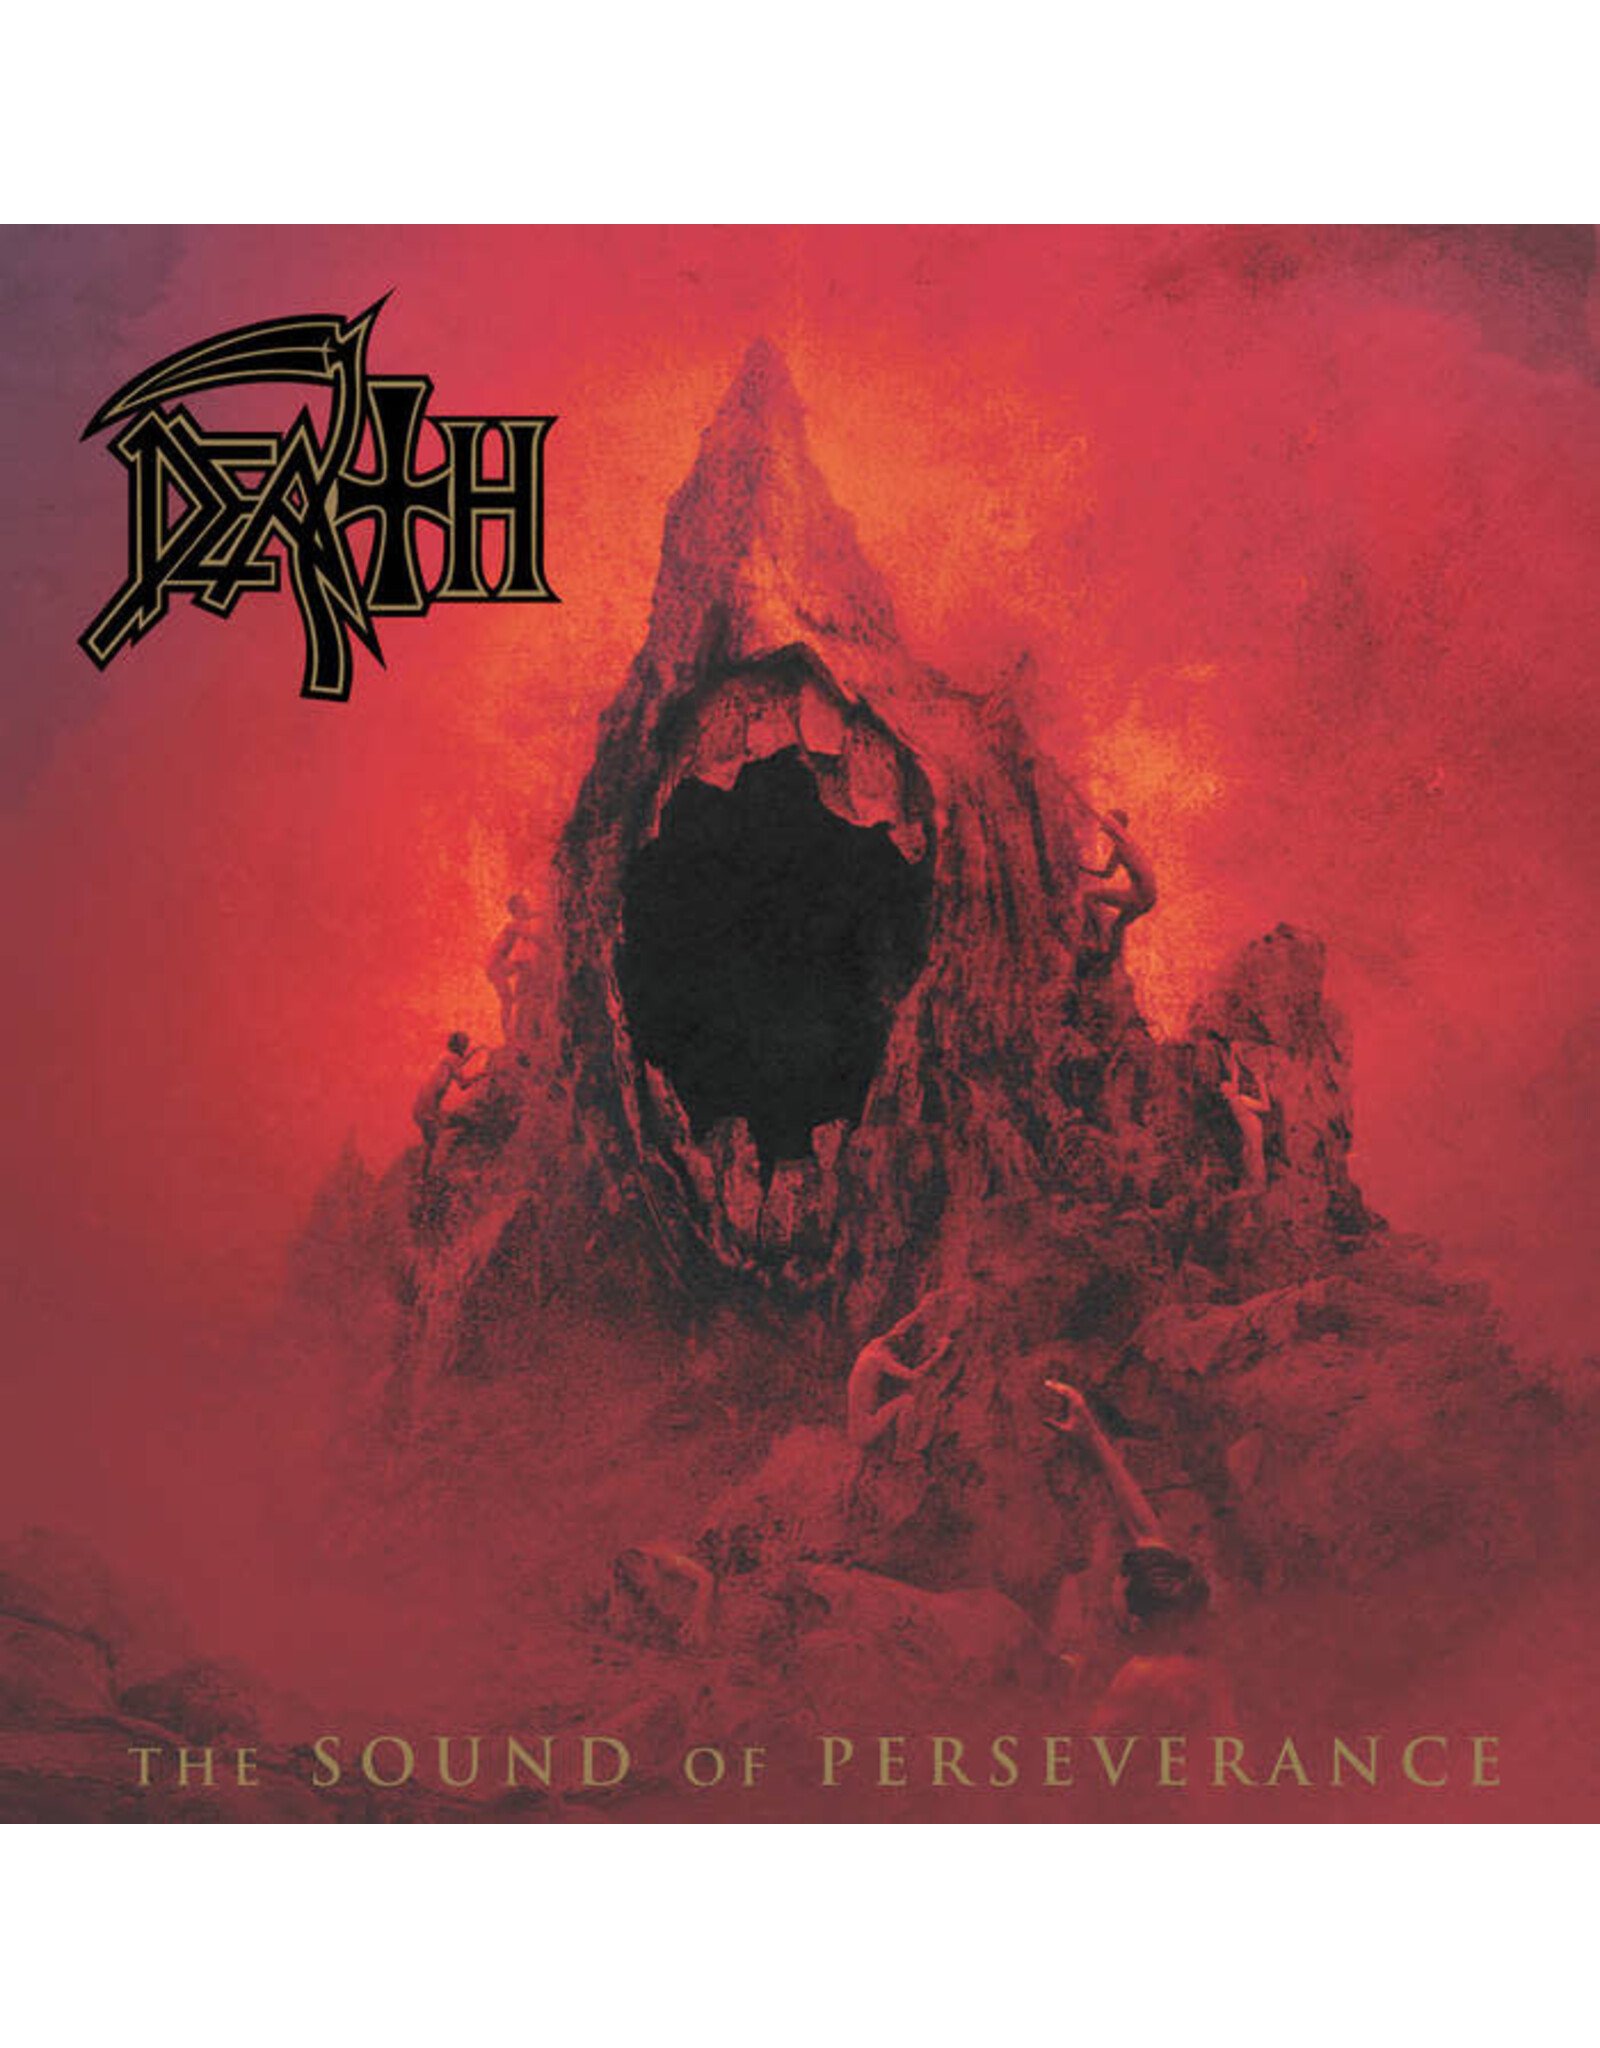 Relapse Death: The Sound of Perseverance LP